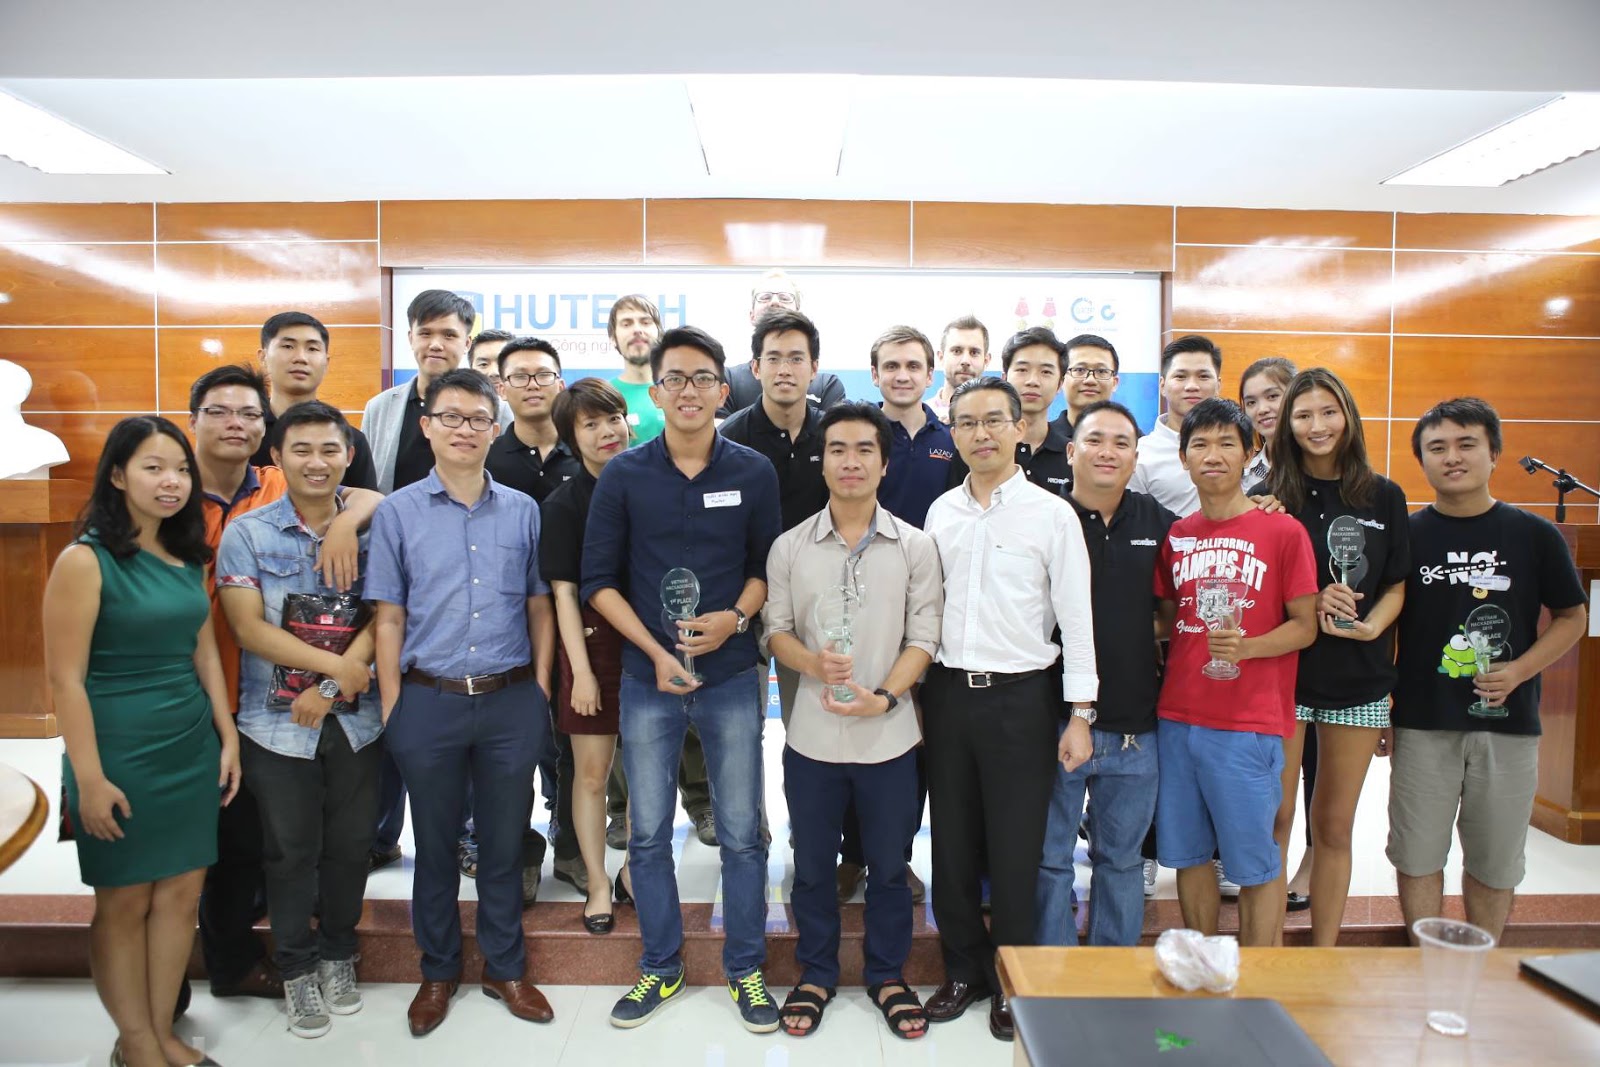 HUTECH students received “Excellent Coding Skill” Award in Vietnam Hackademics 2015. 39